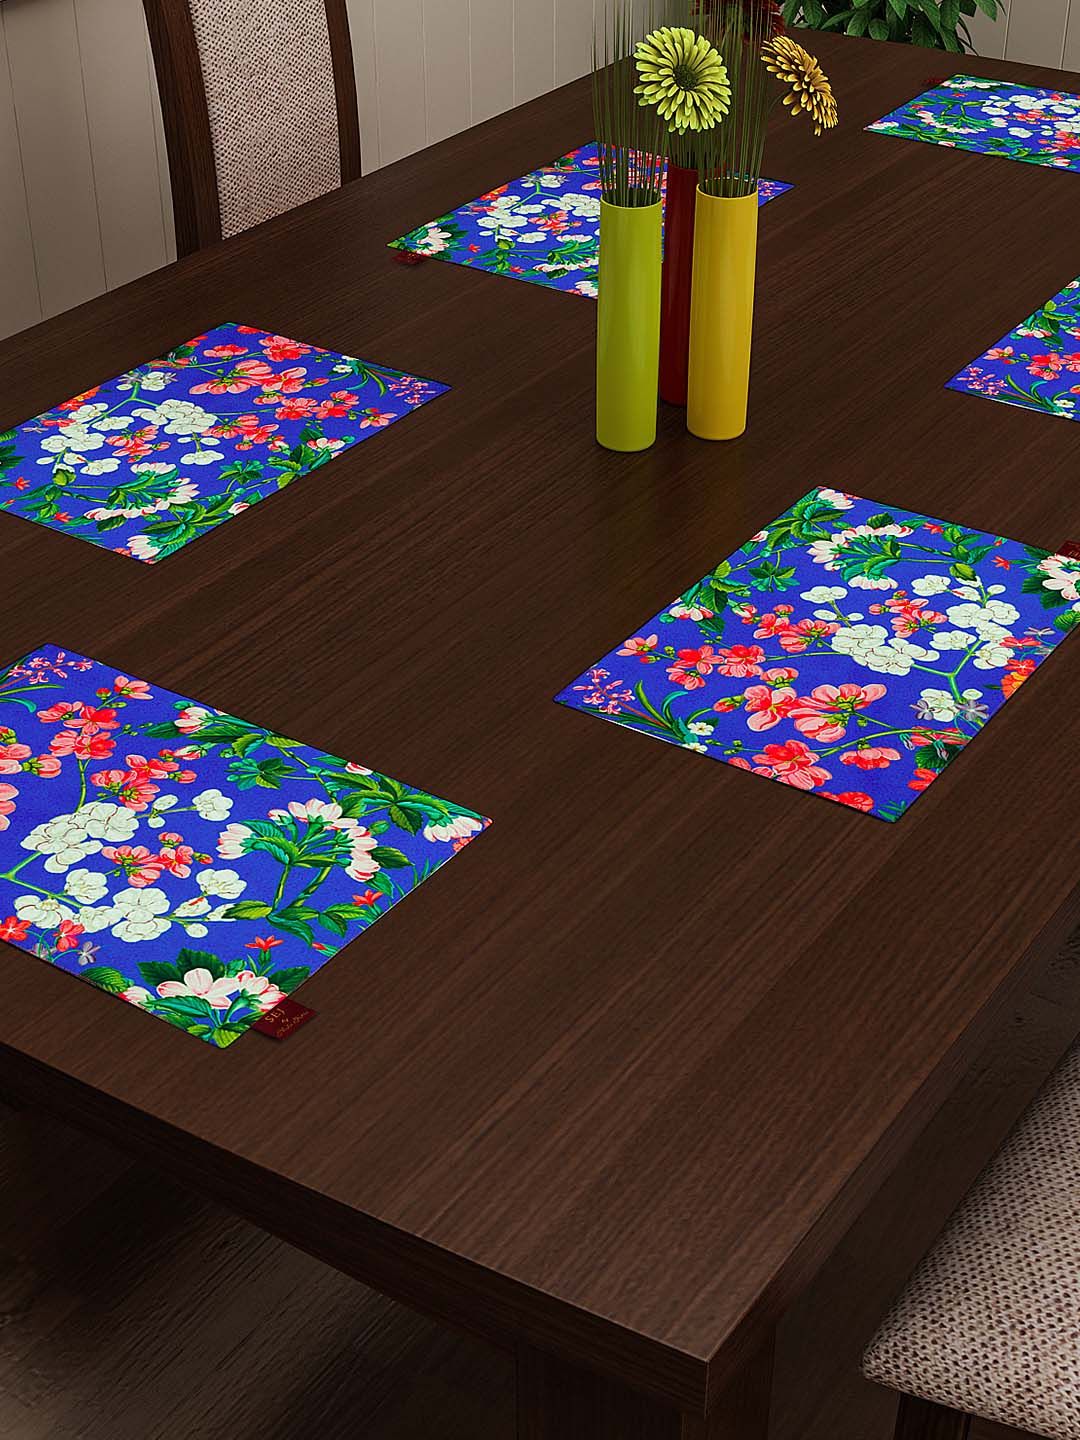 SEJ by Nisha Gupta Blue Set of 4 Floral Print Table Mats Price in India